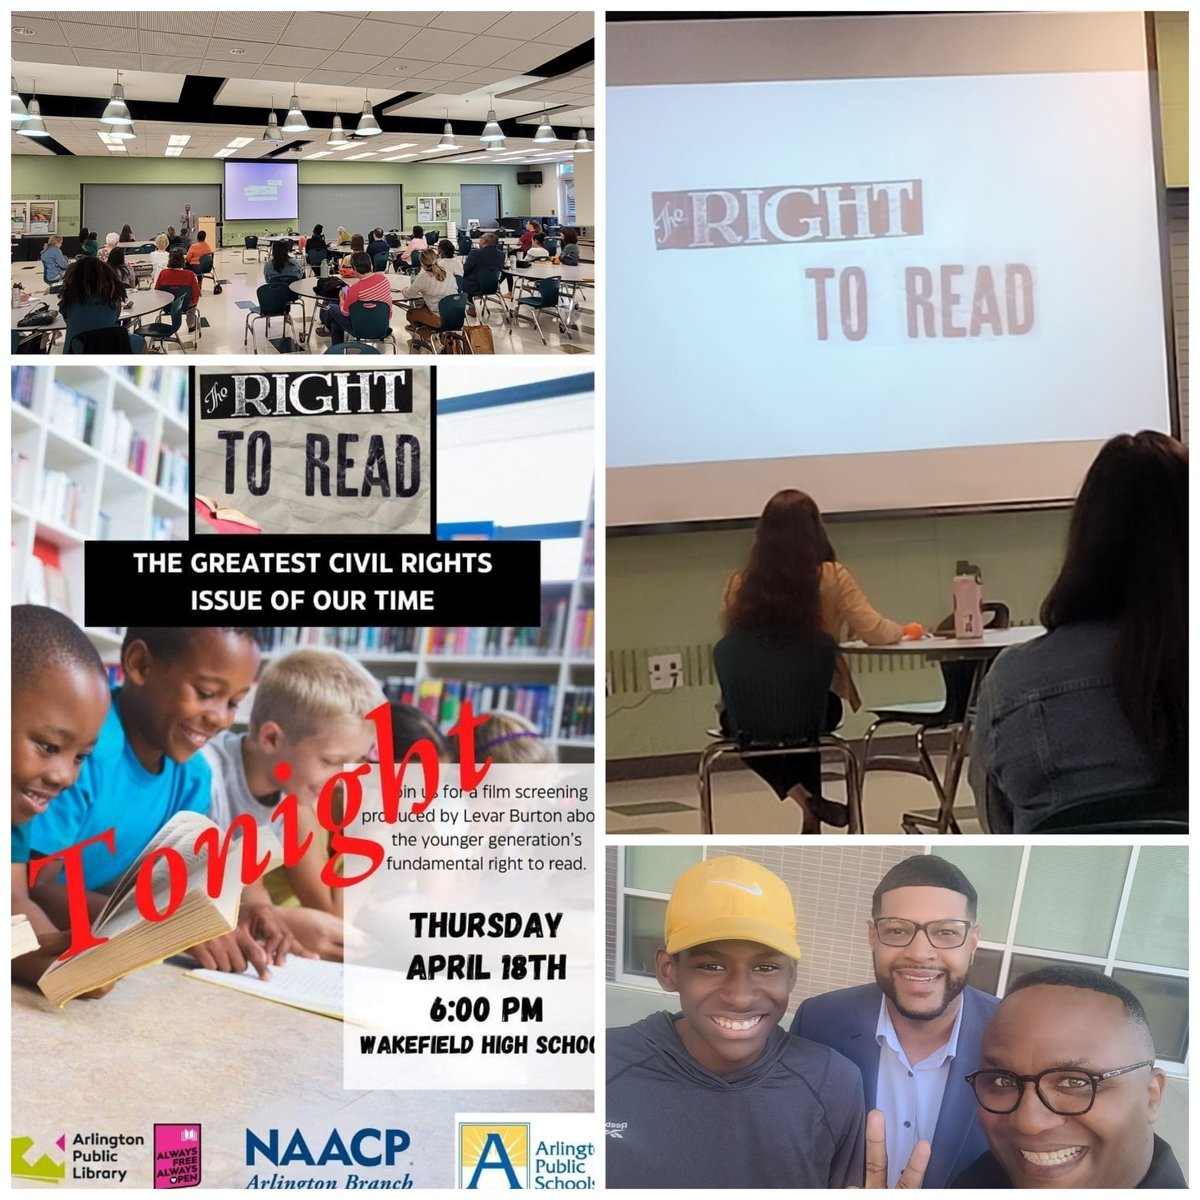 Packed event! Literacy, a fundamental right, demands our attention. Leaders show up! To create meaningful change, I pledge to work closely with stakeholders, avoiding performative allyship. We must act with urgency to secure a better future for our youth.